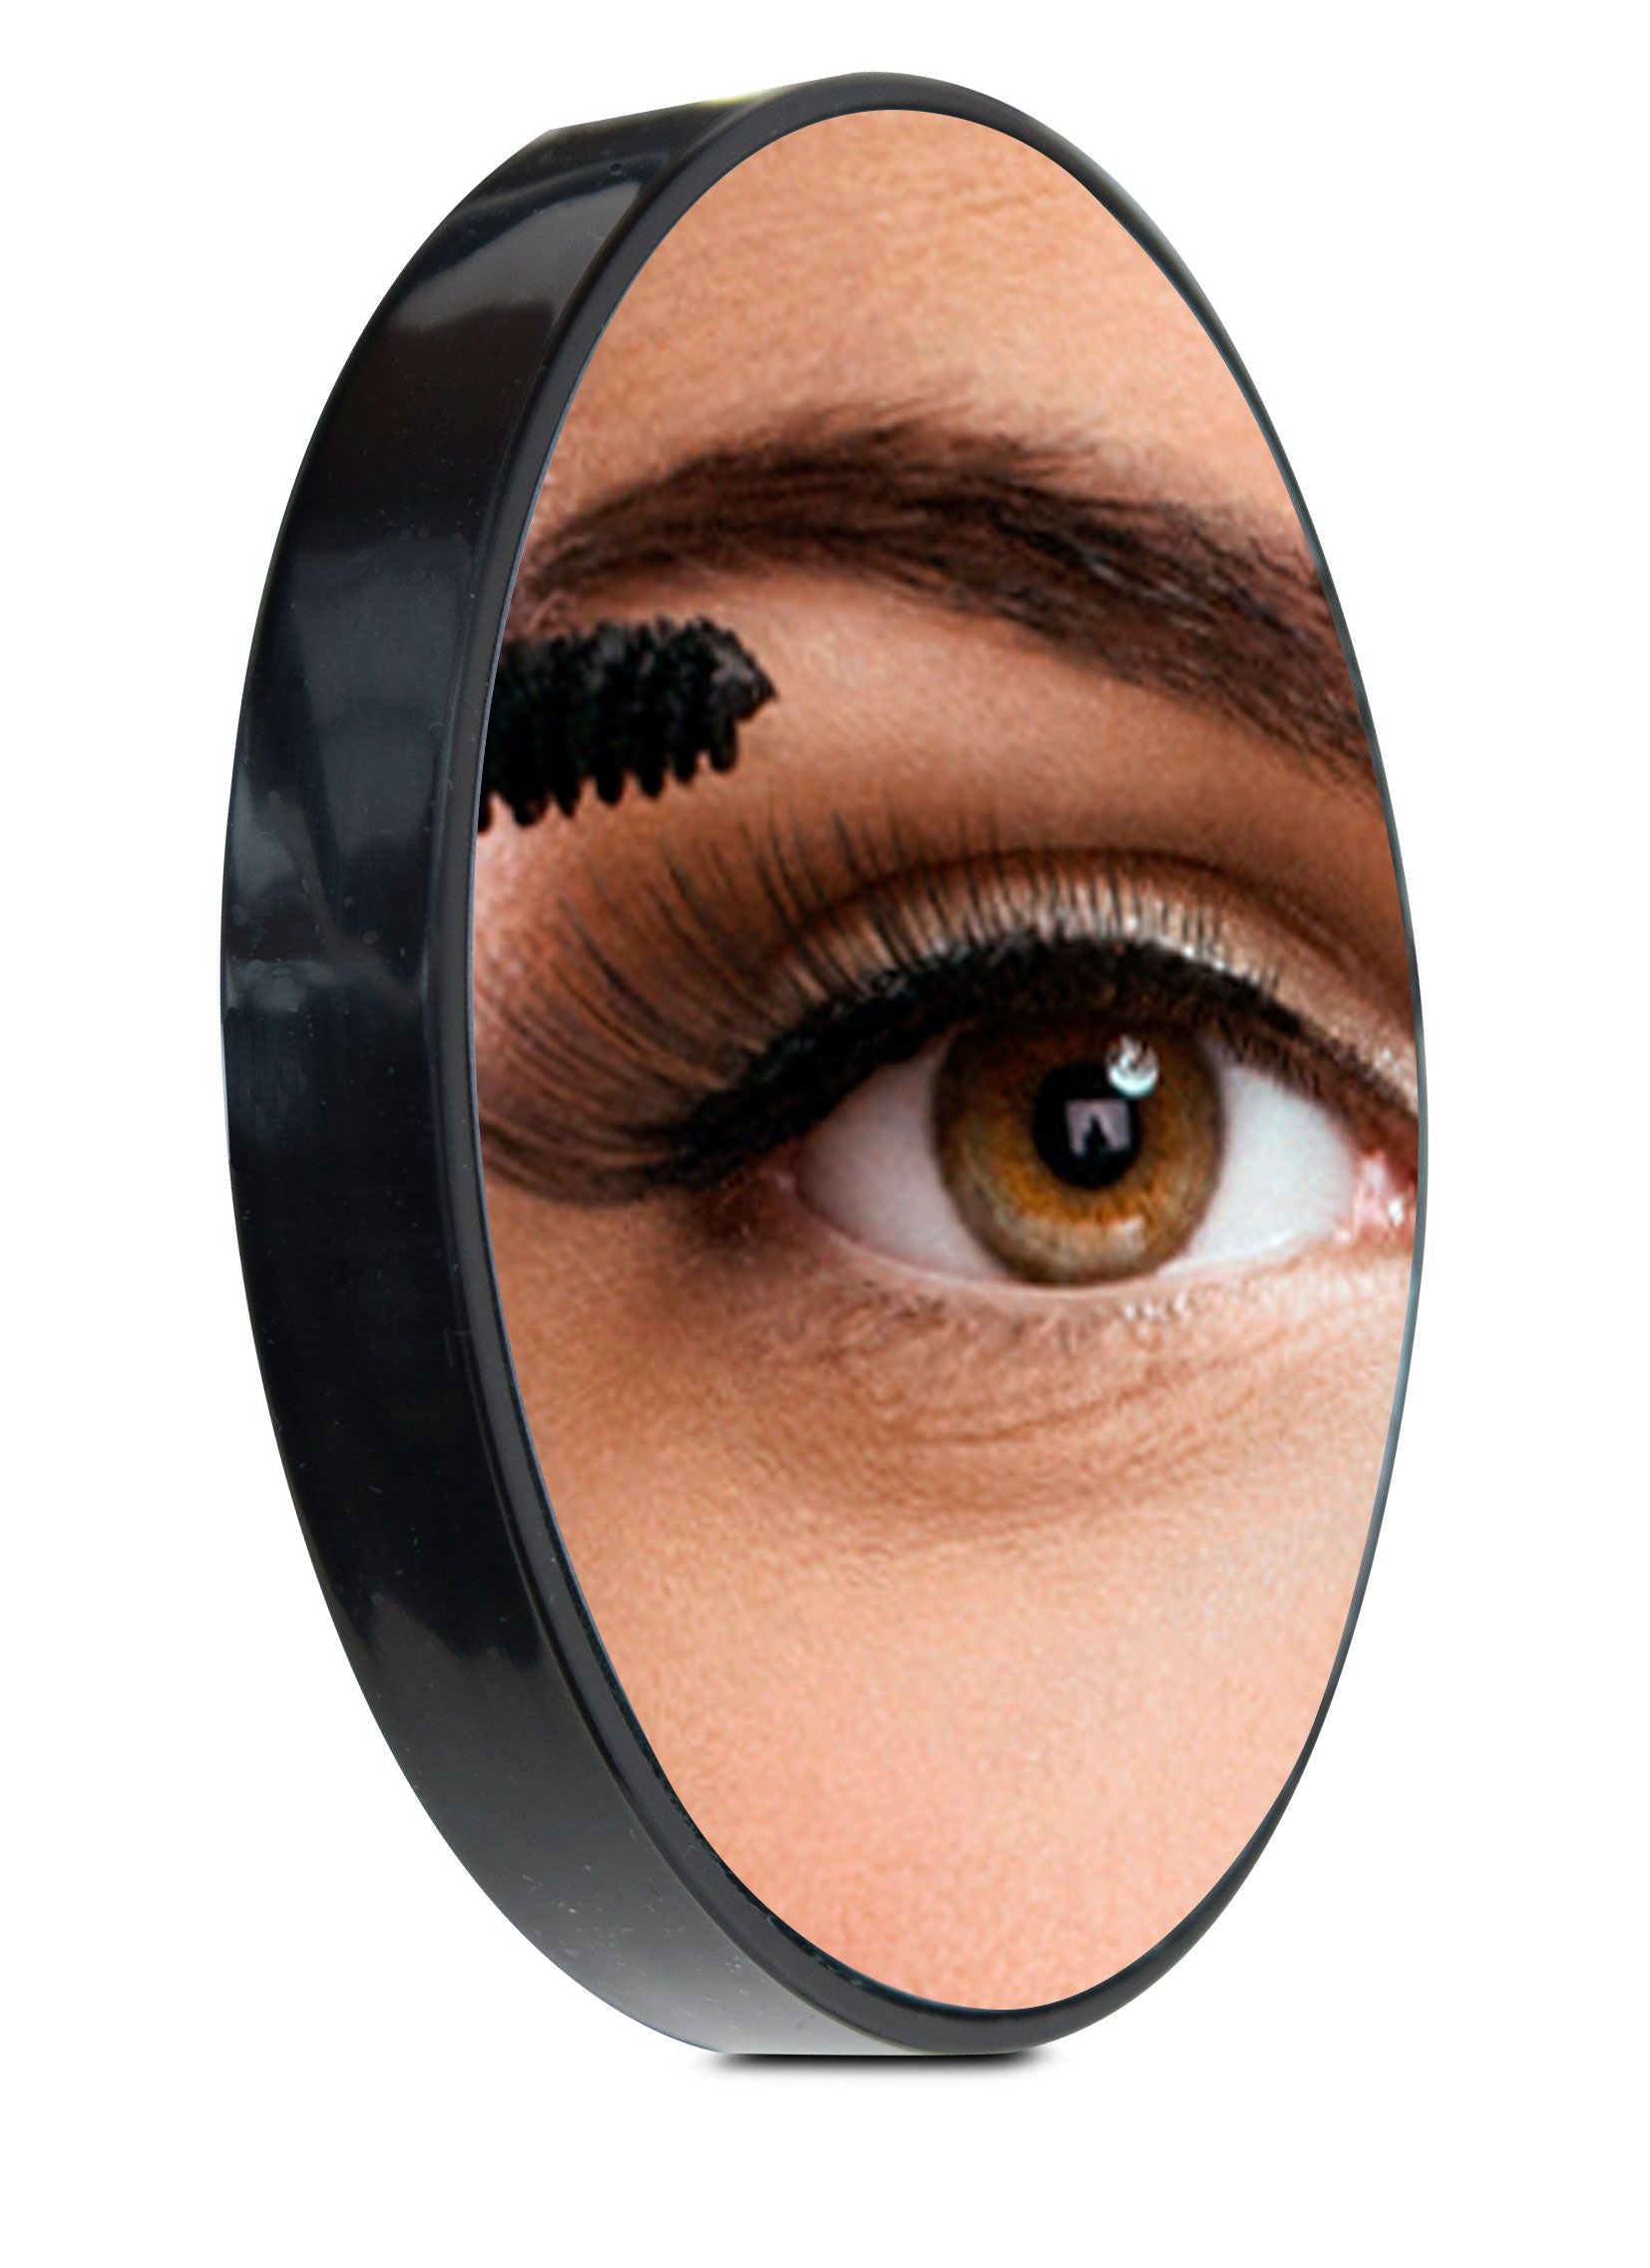 compact 10x magnification mirror with reflection of ladies eye applying mascara